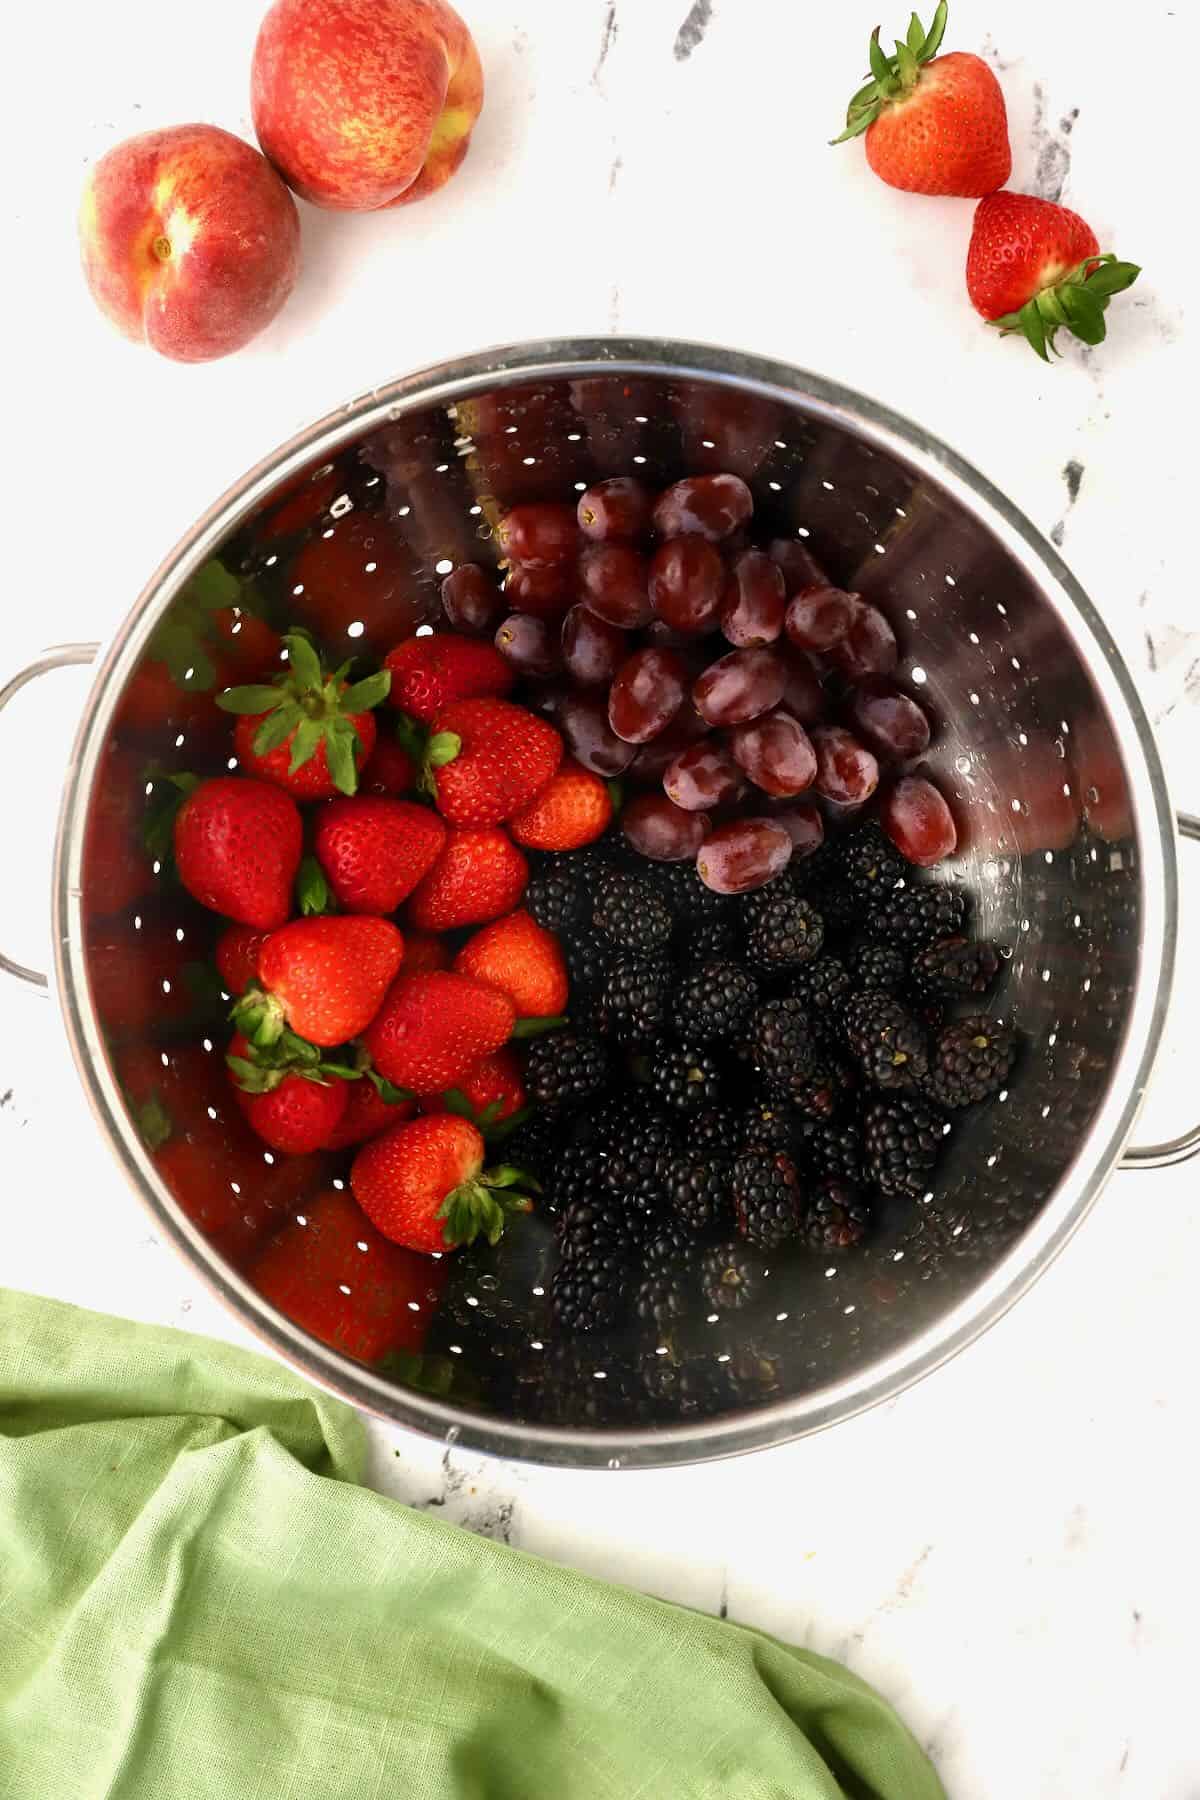 A colander with strawberries, grapes and blackberries. 